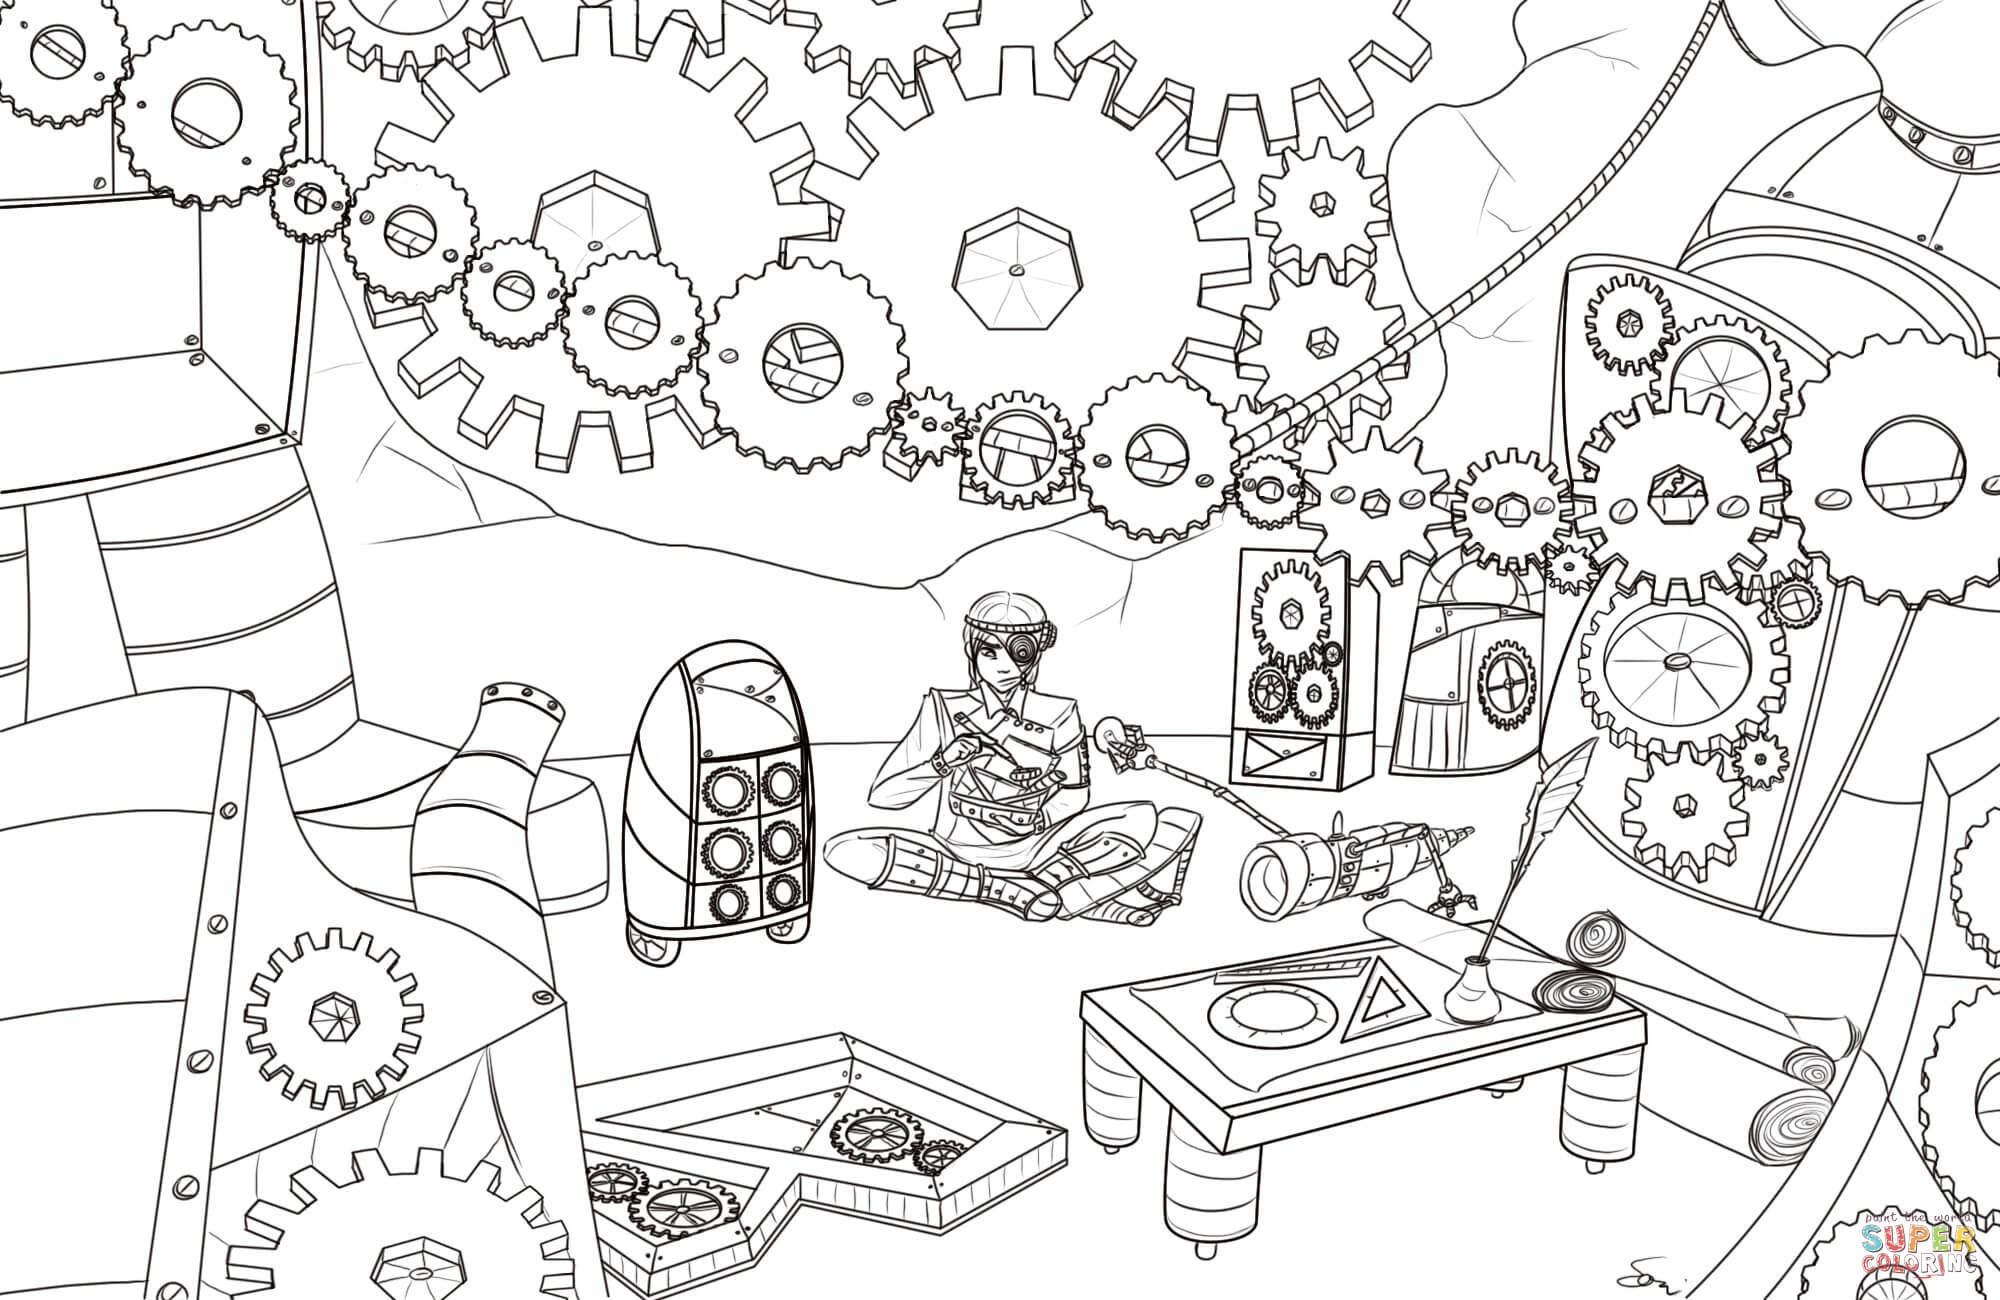 Steampunk Gears Coloring Page | Free Printable Coloring Pages - Free Printable Gears